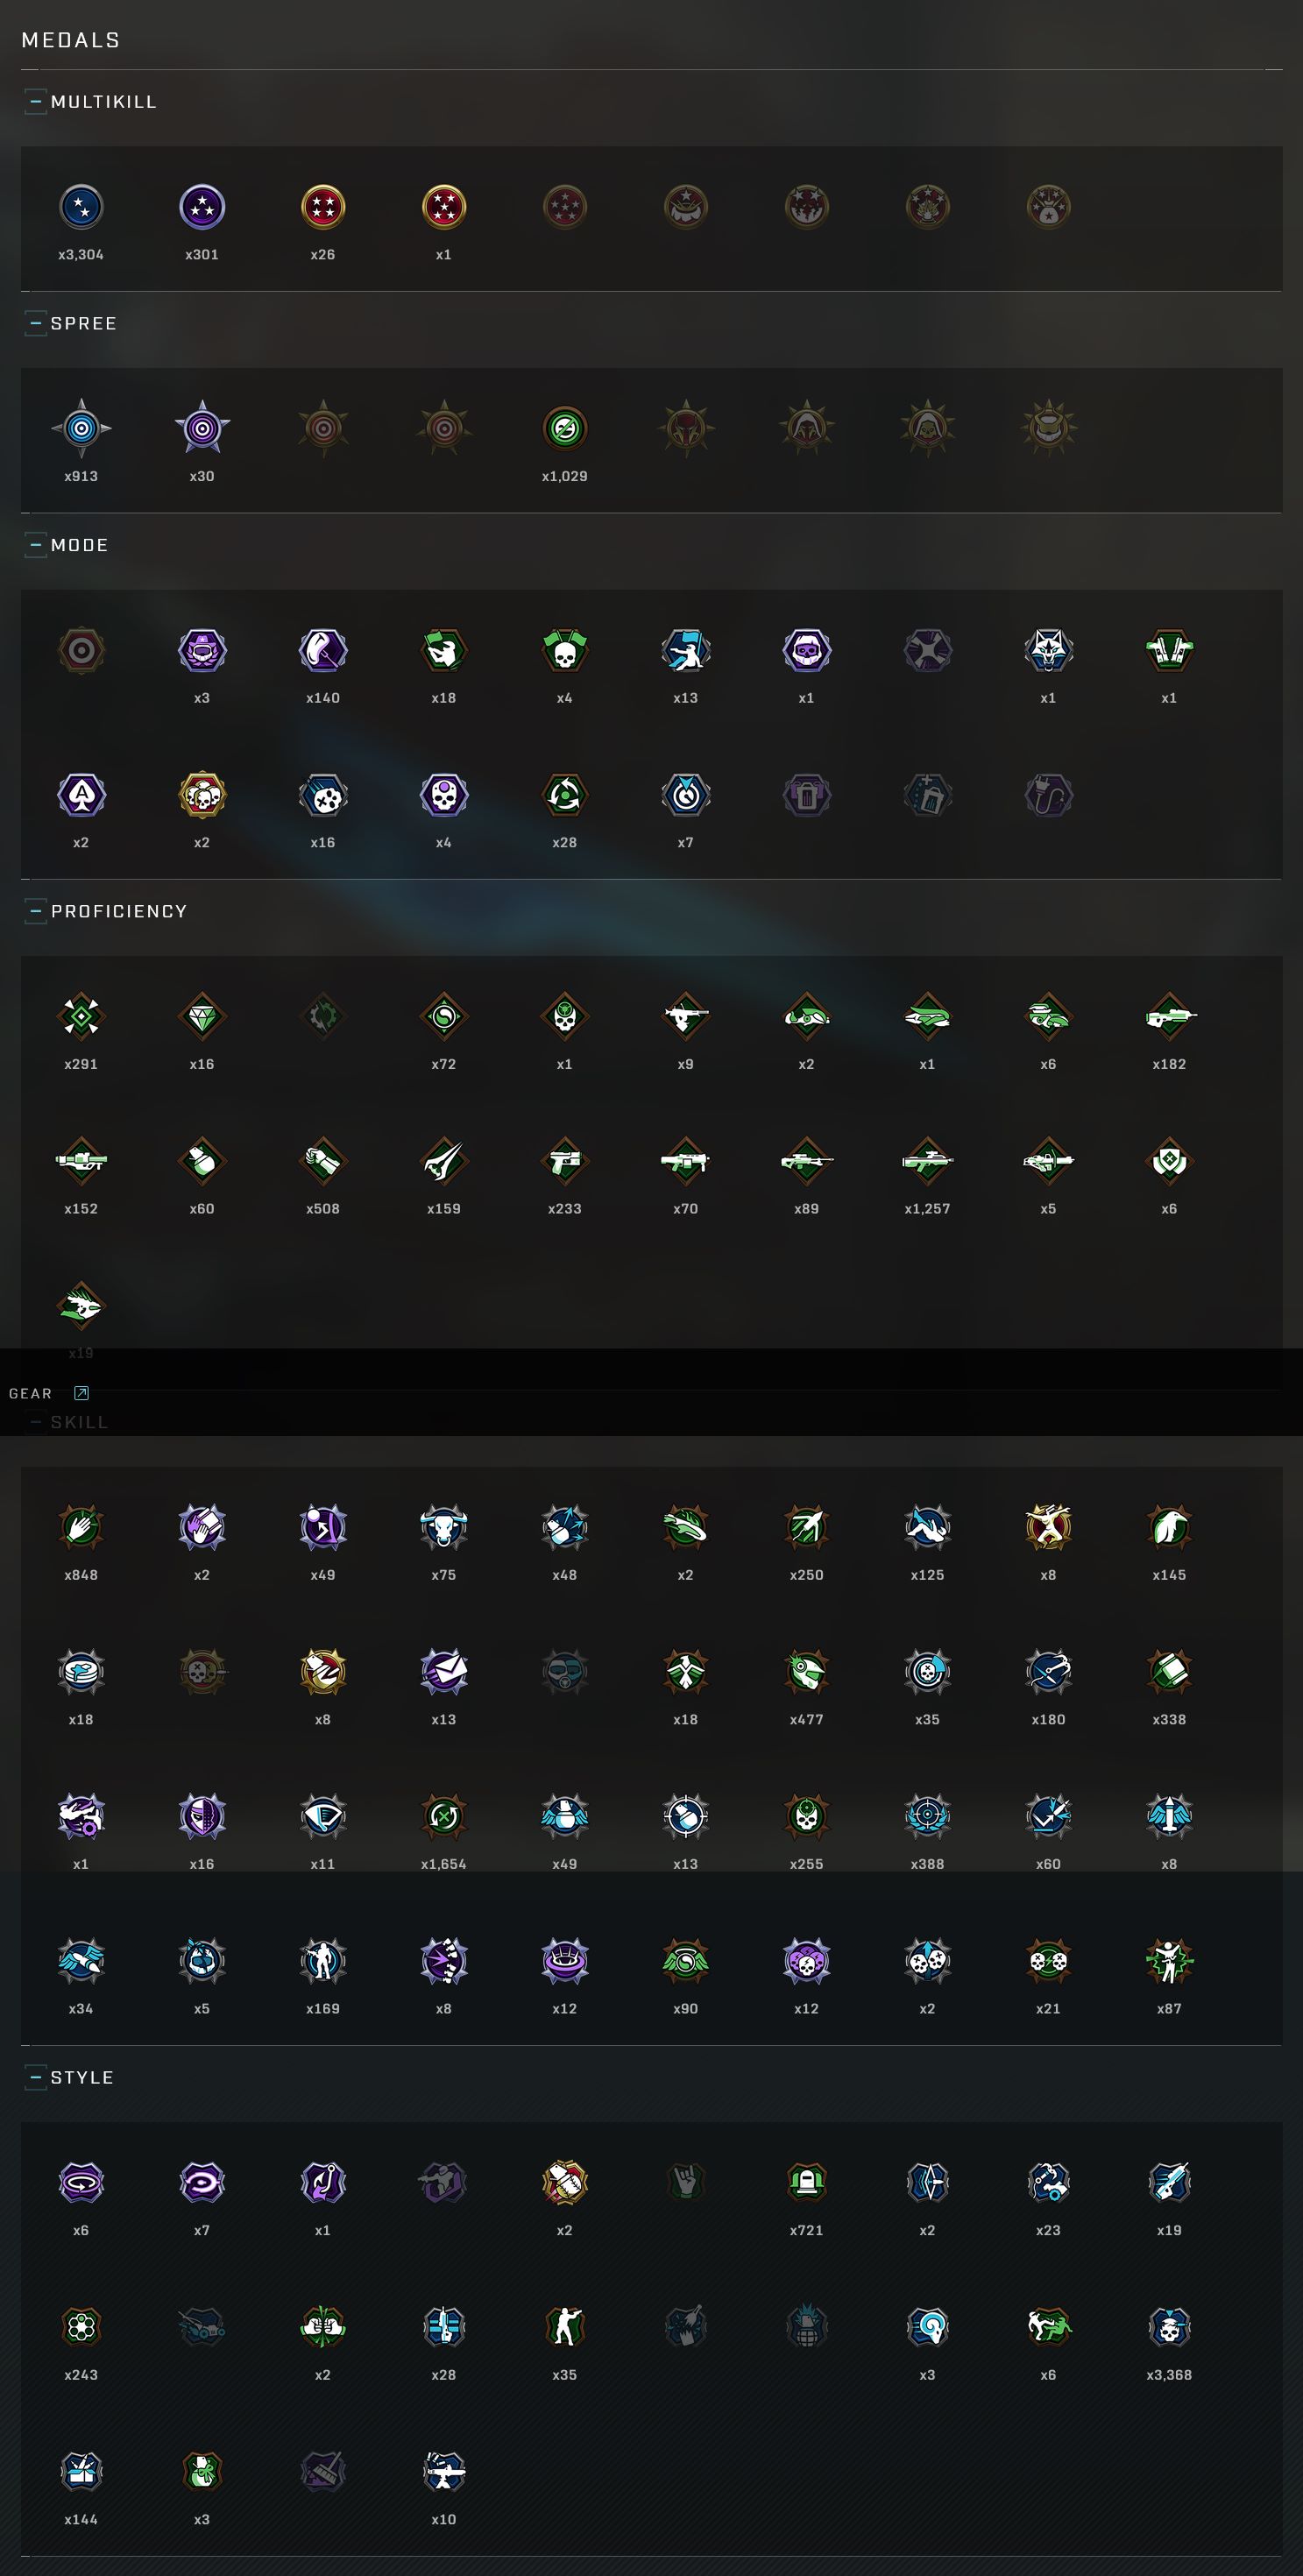 Medals as seen rendered on the Halo Waypoint site